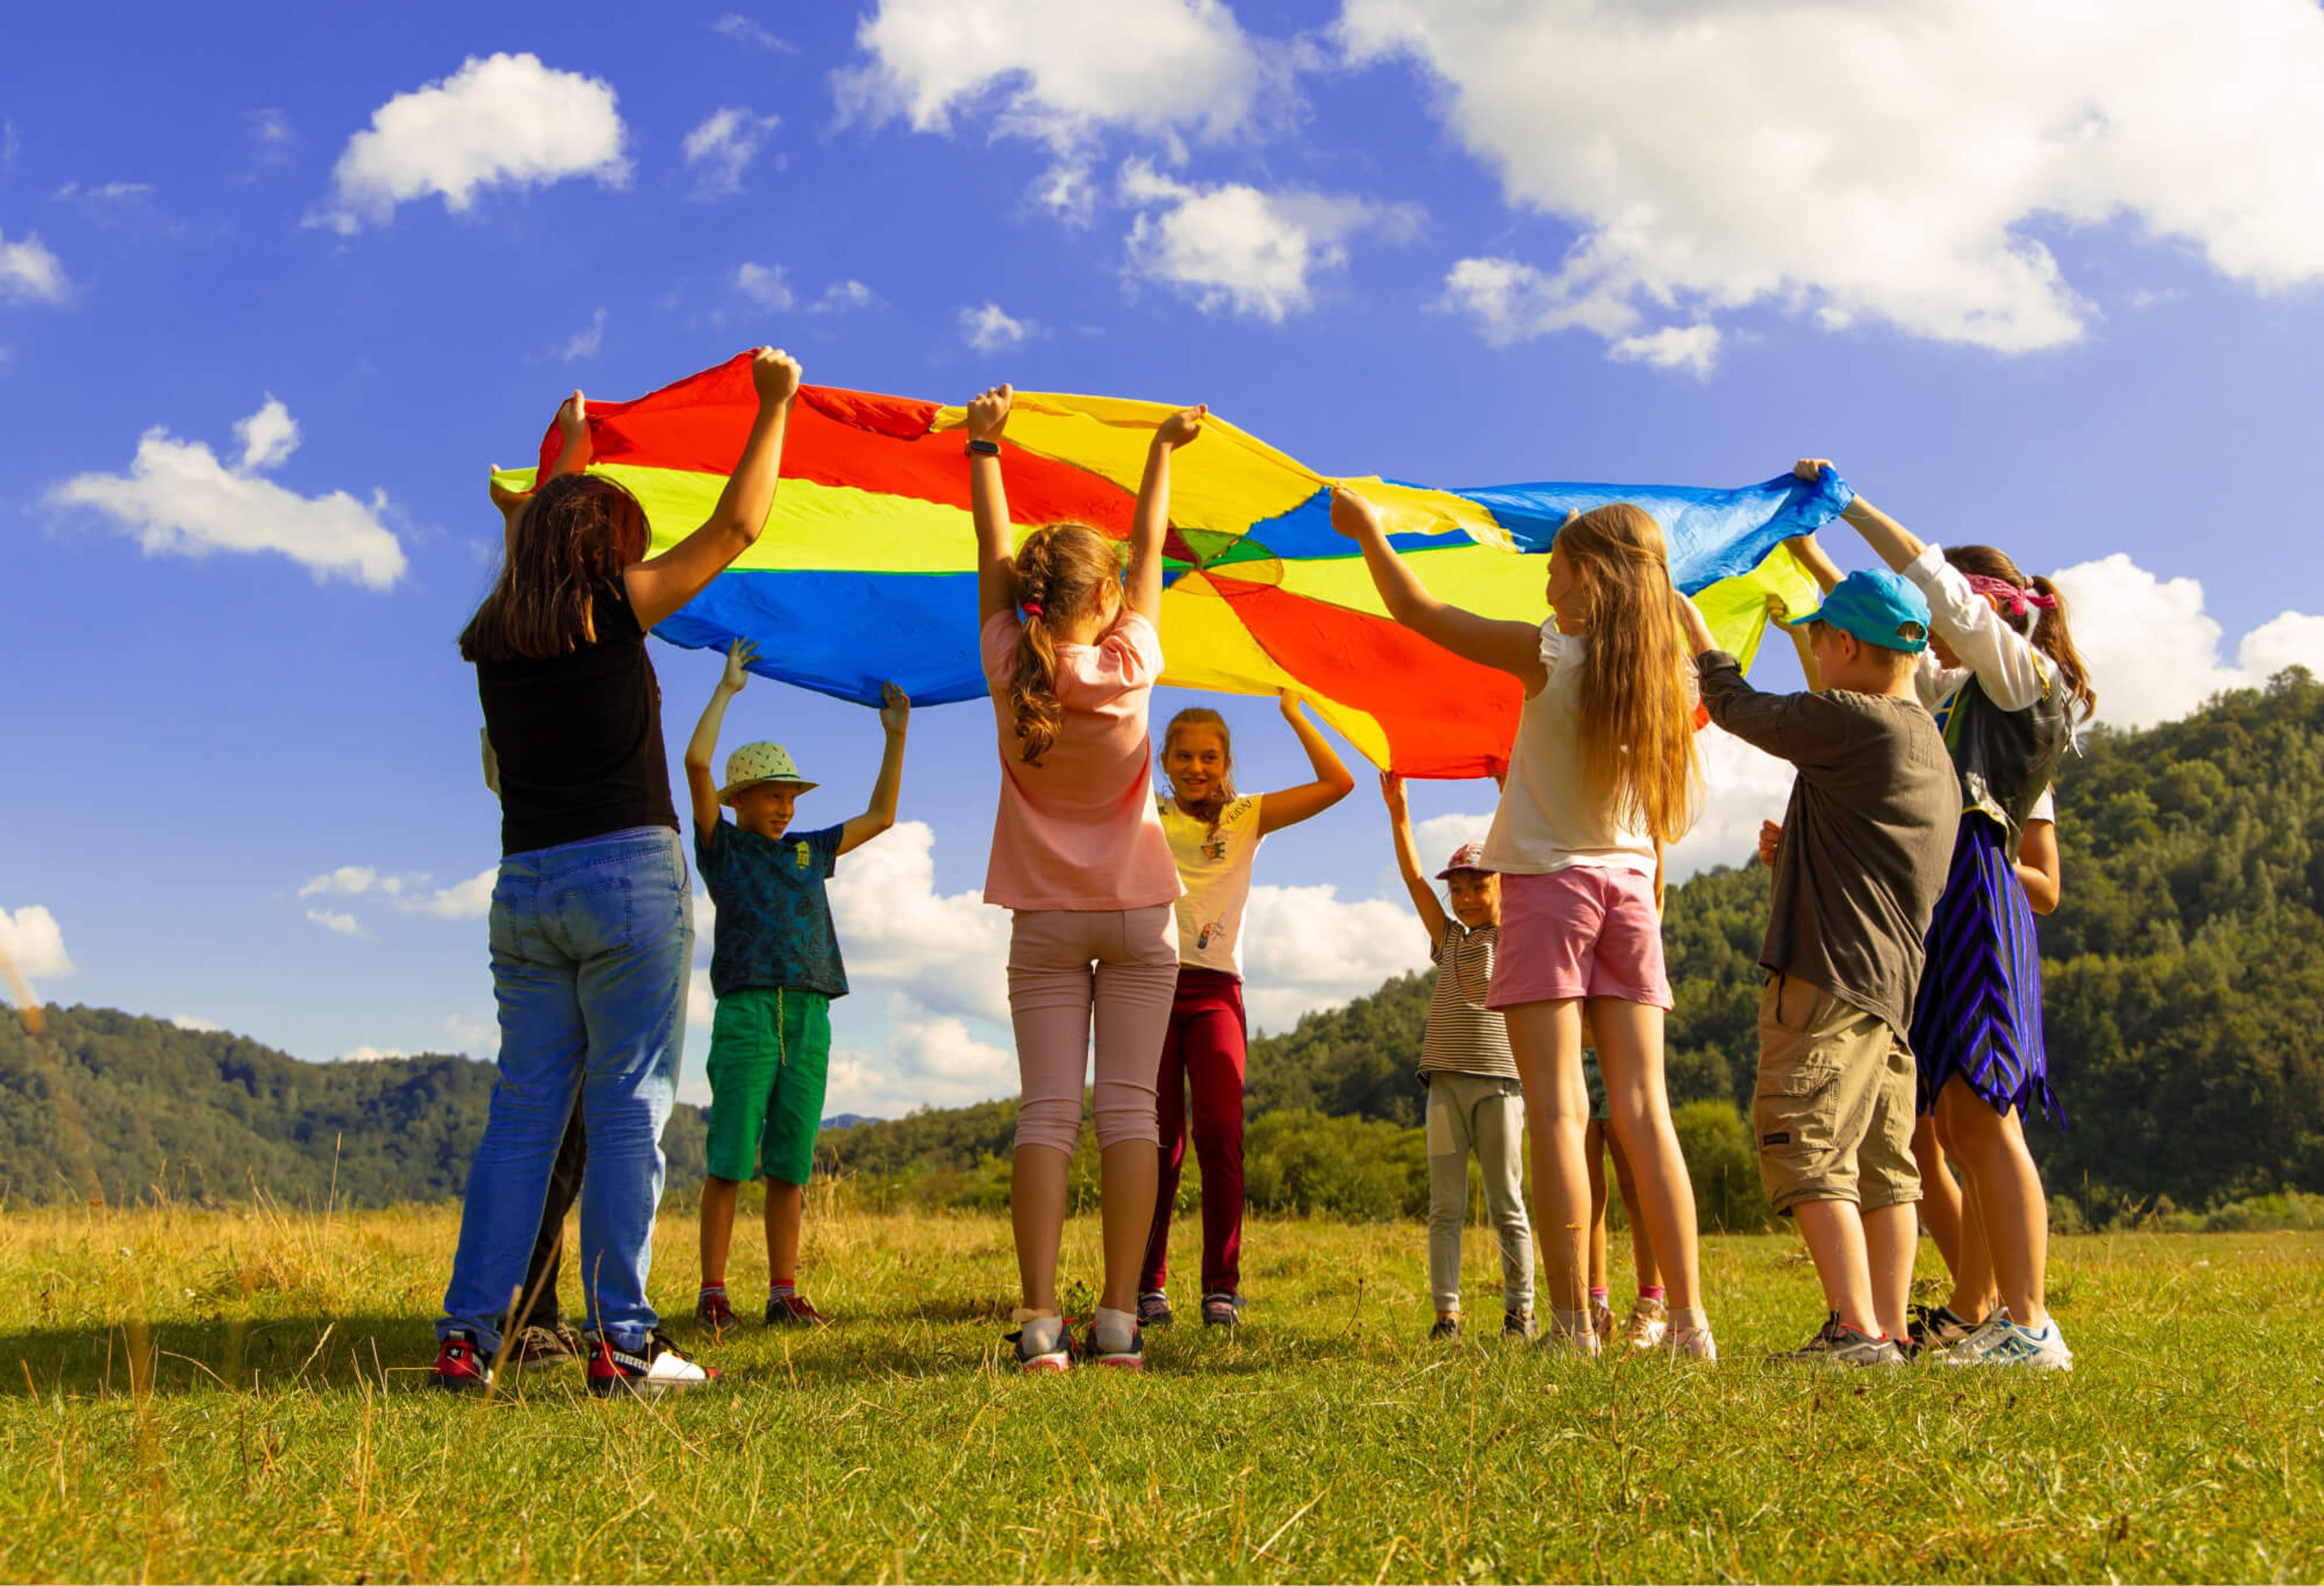 A group of children play games with a colorful parachute.